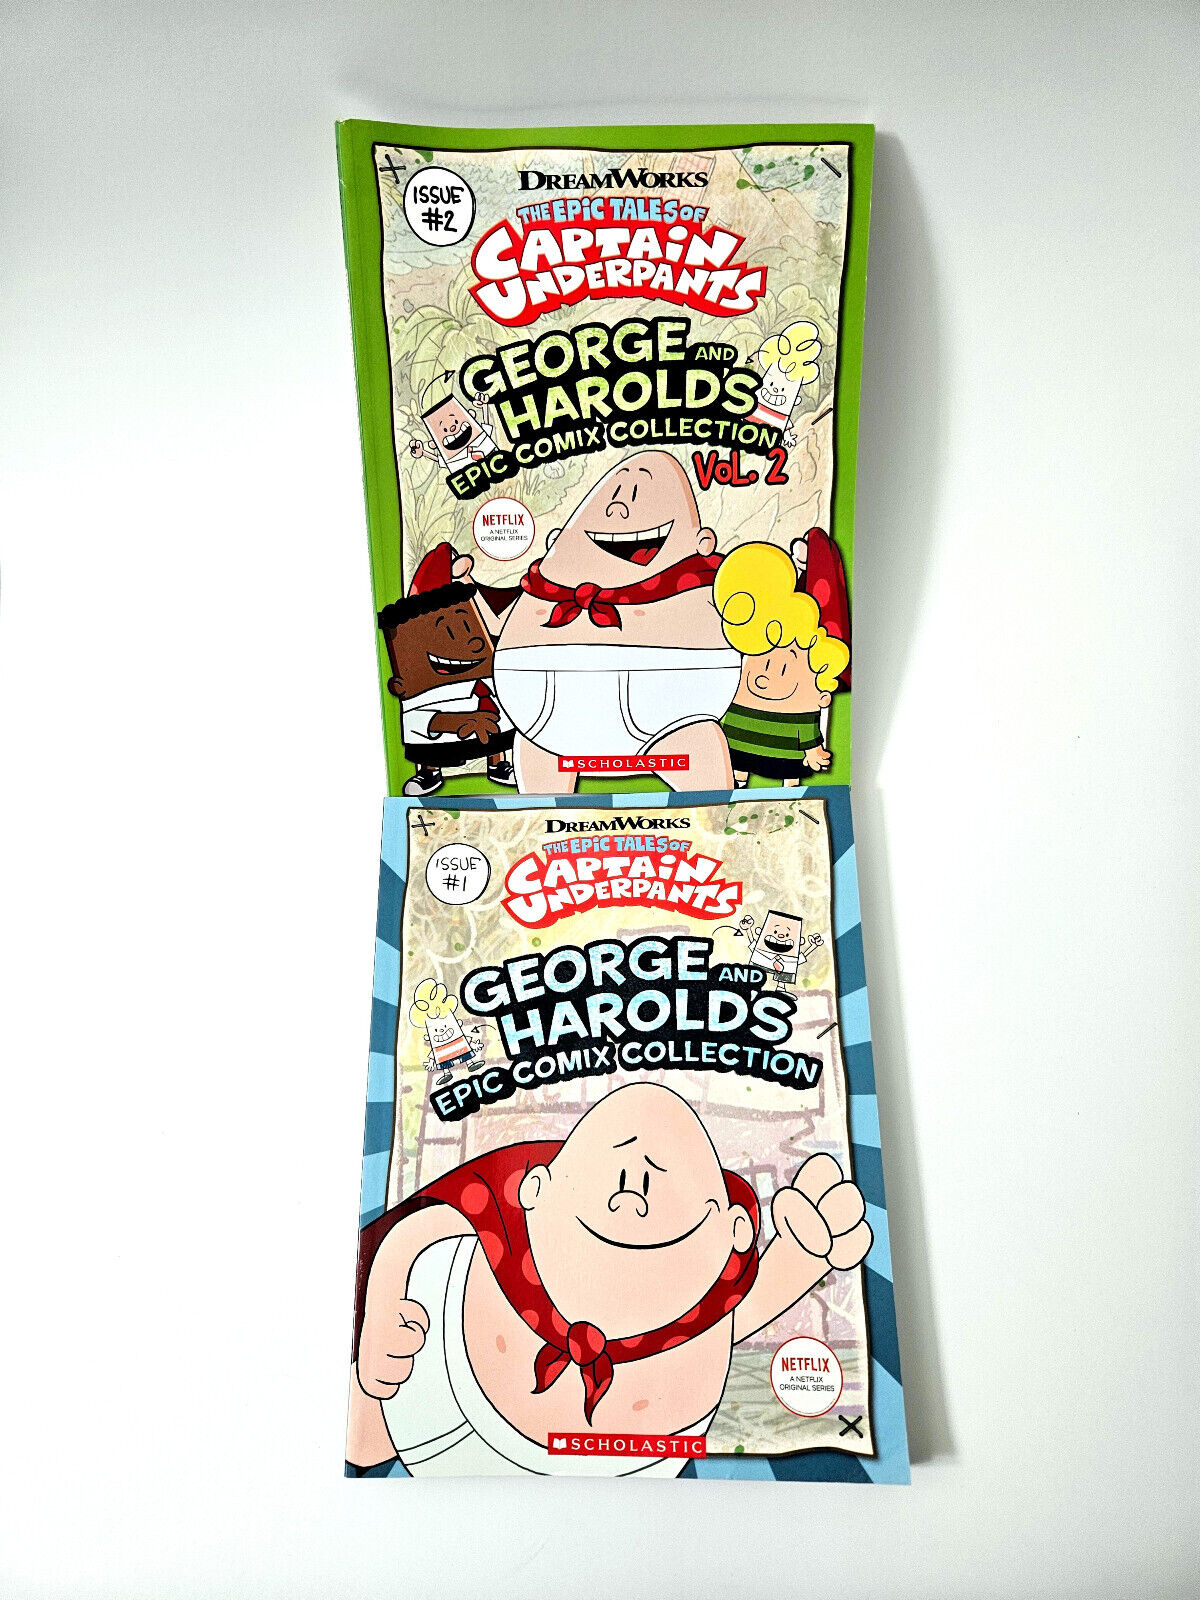 The Epic Tales of Captain Underpants Issue 1 & 2 Comix Collection George Harold